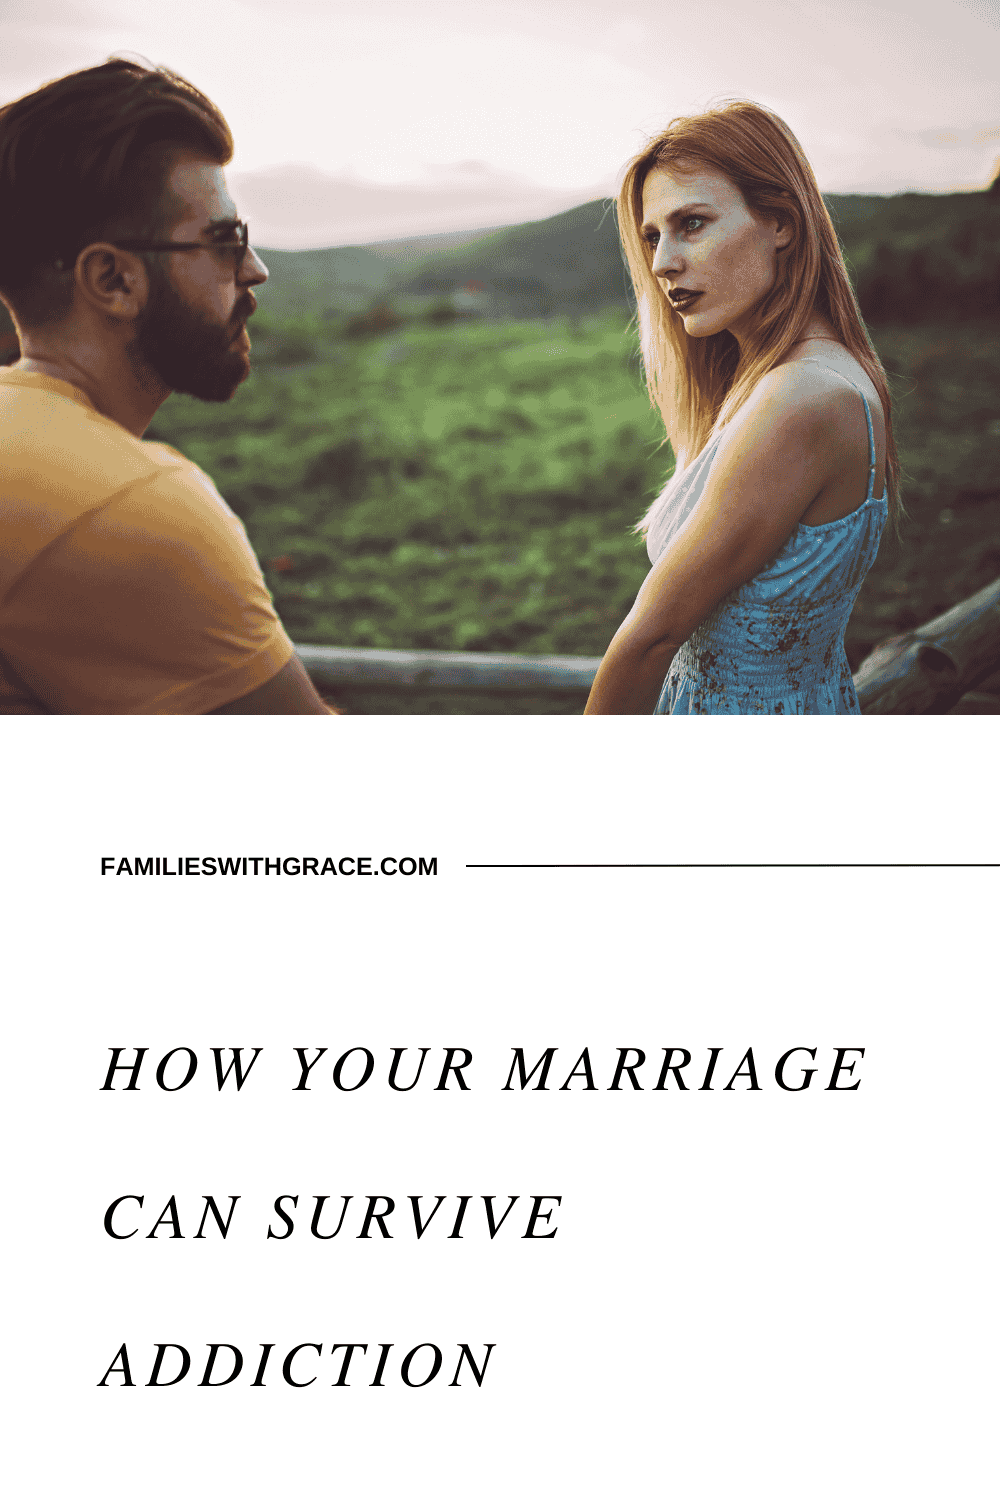 Dealing with addiction in marriage